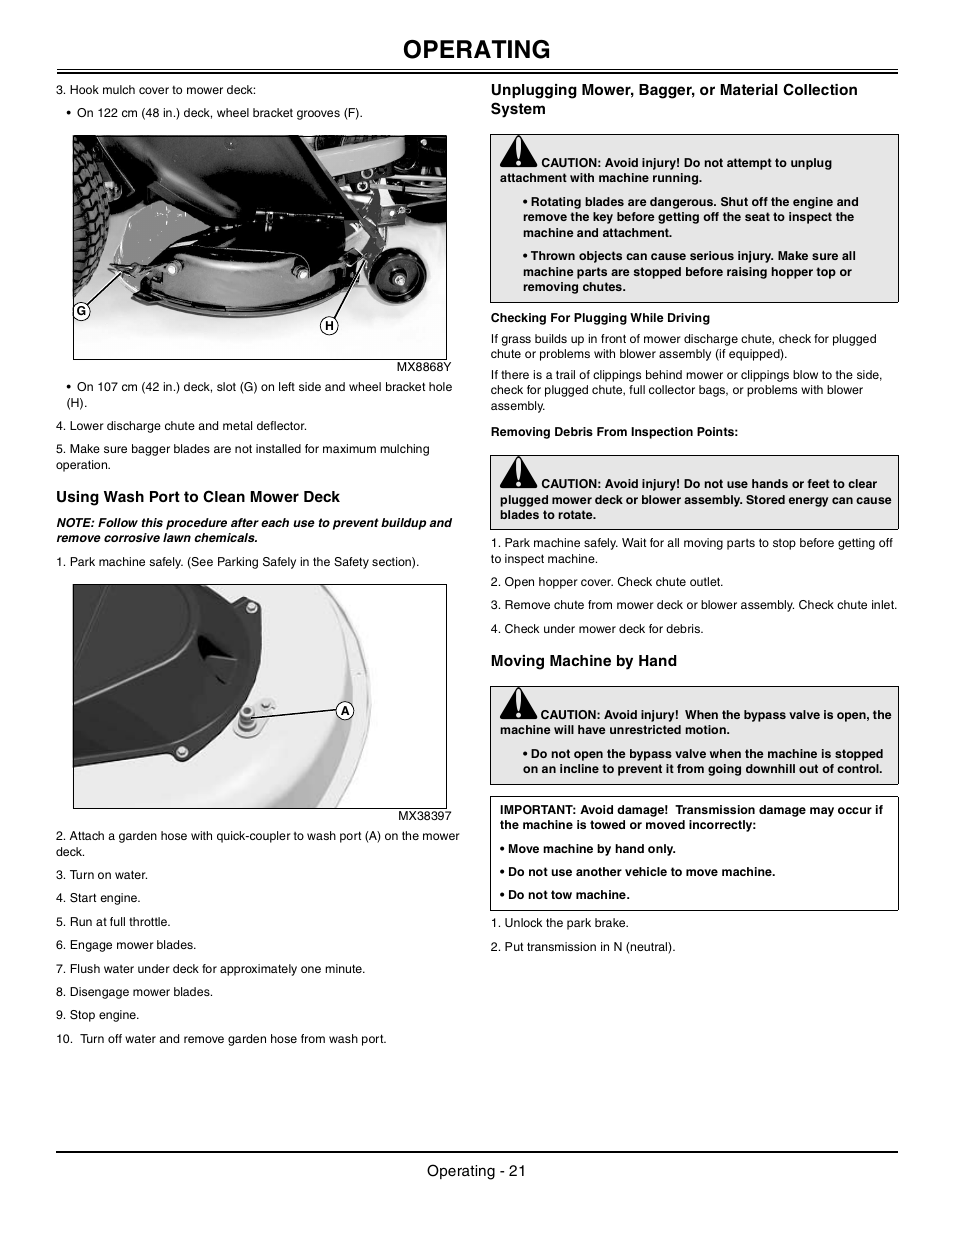 Using wash port to clean mower deck, Checking for plugging while driving, Removing debris from inspection points | Moving machine by hand, Operating | John Deere la105 User Manual | Page 22 / 52